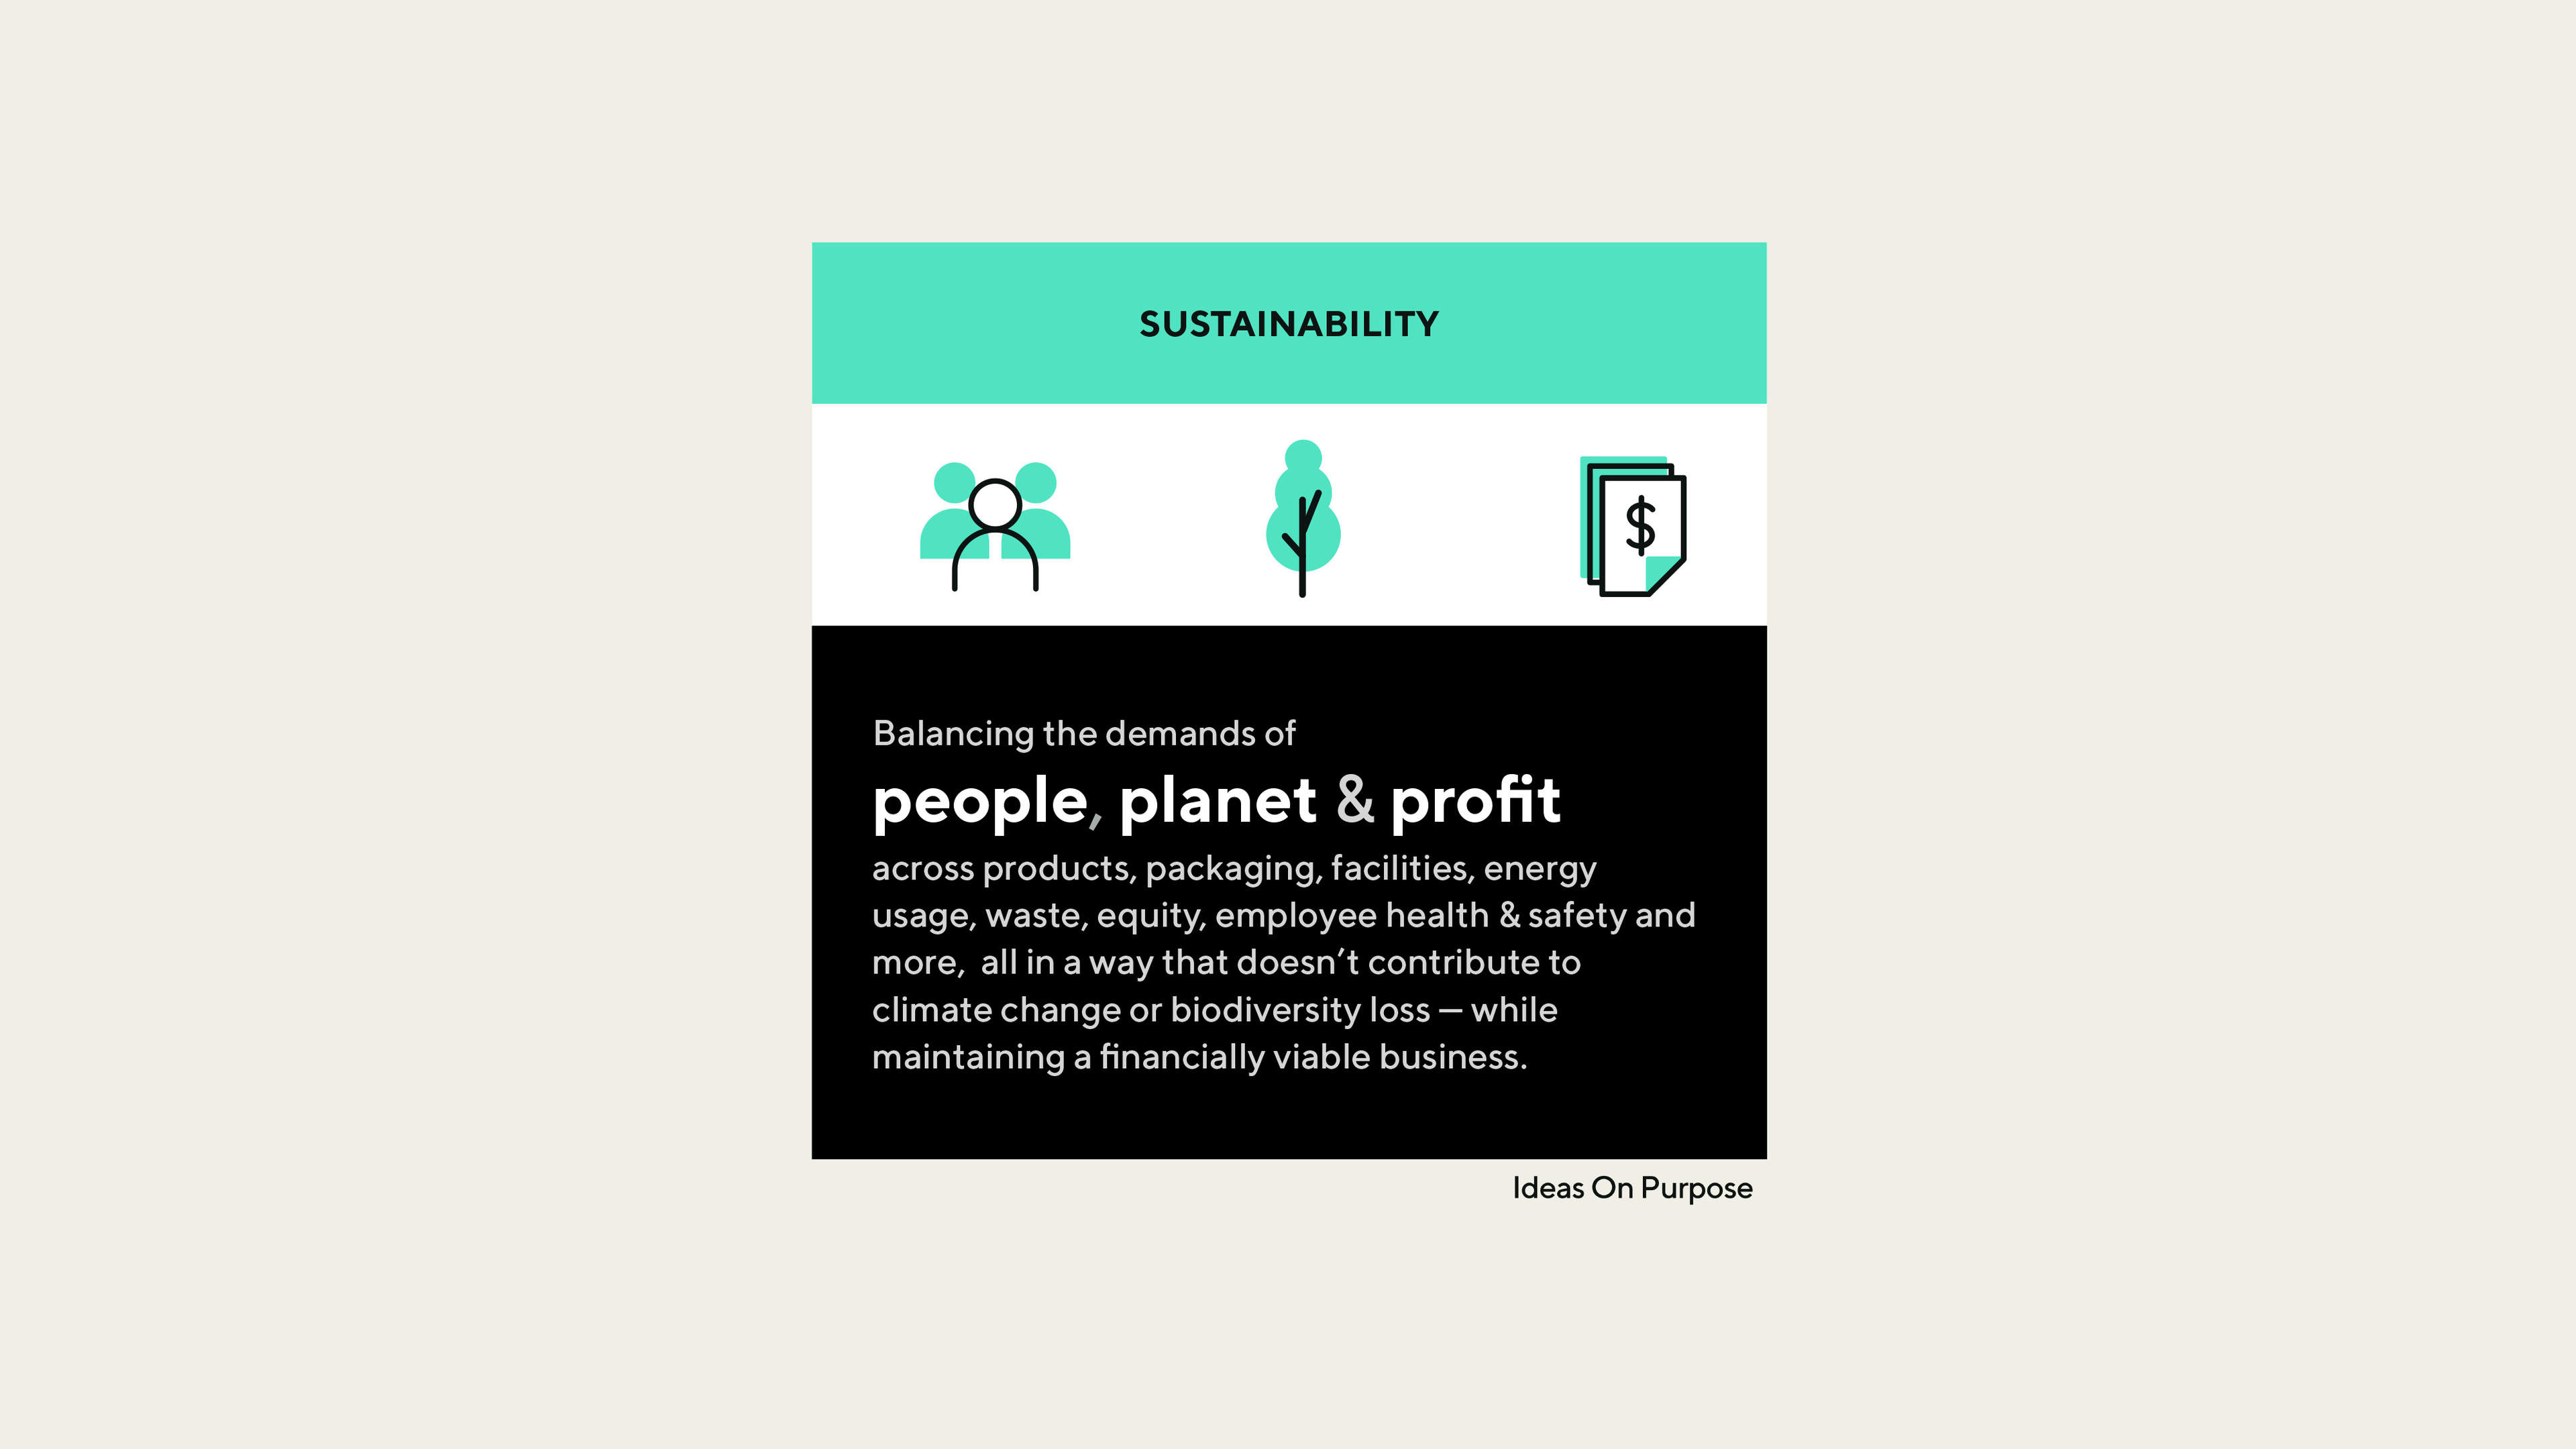 Sustainability: Balancing the demands of people, planet & profit 
across products, packaging, facilities, energy usage, waste, equity, employee health & safety and more,  all in a way that doesn’t contribute to climate change or biodiversity loss — while maintaining a financially viable business. 